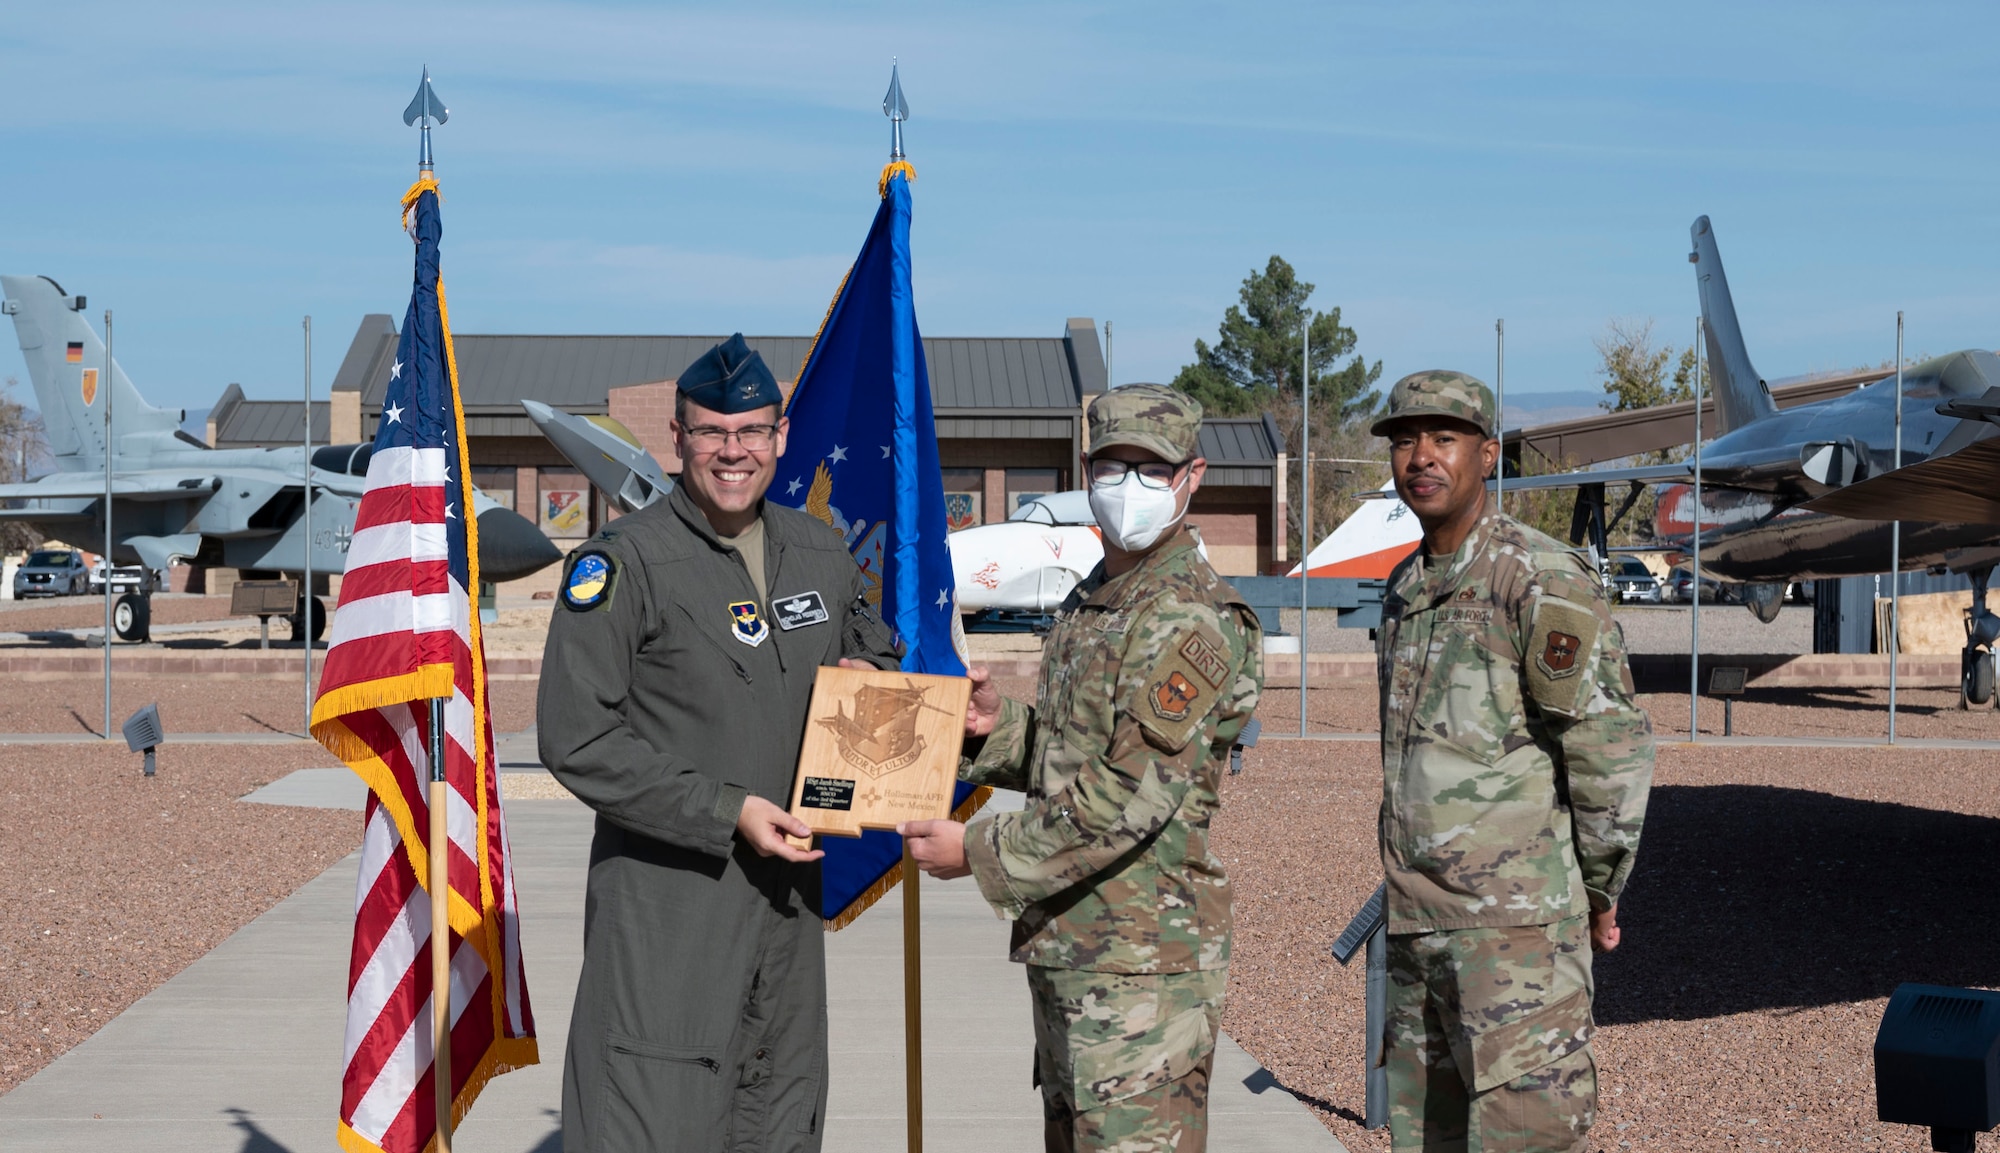 Master Sgt. Jacob Snellings, quarterly award winner, accepts the senior noncommisioned officer of the quarter award during the 49th Wing’s 3rd ceremony, Nov. 19, 2021, on Holloman Air Force Base, New Mexico. Quarterly award winners were selected based on their technical expertise, demonstration of leadership and job performance. (U.S. Air Force photo by Airman 1st Class Antonio Salfran)